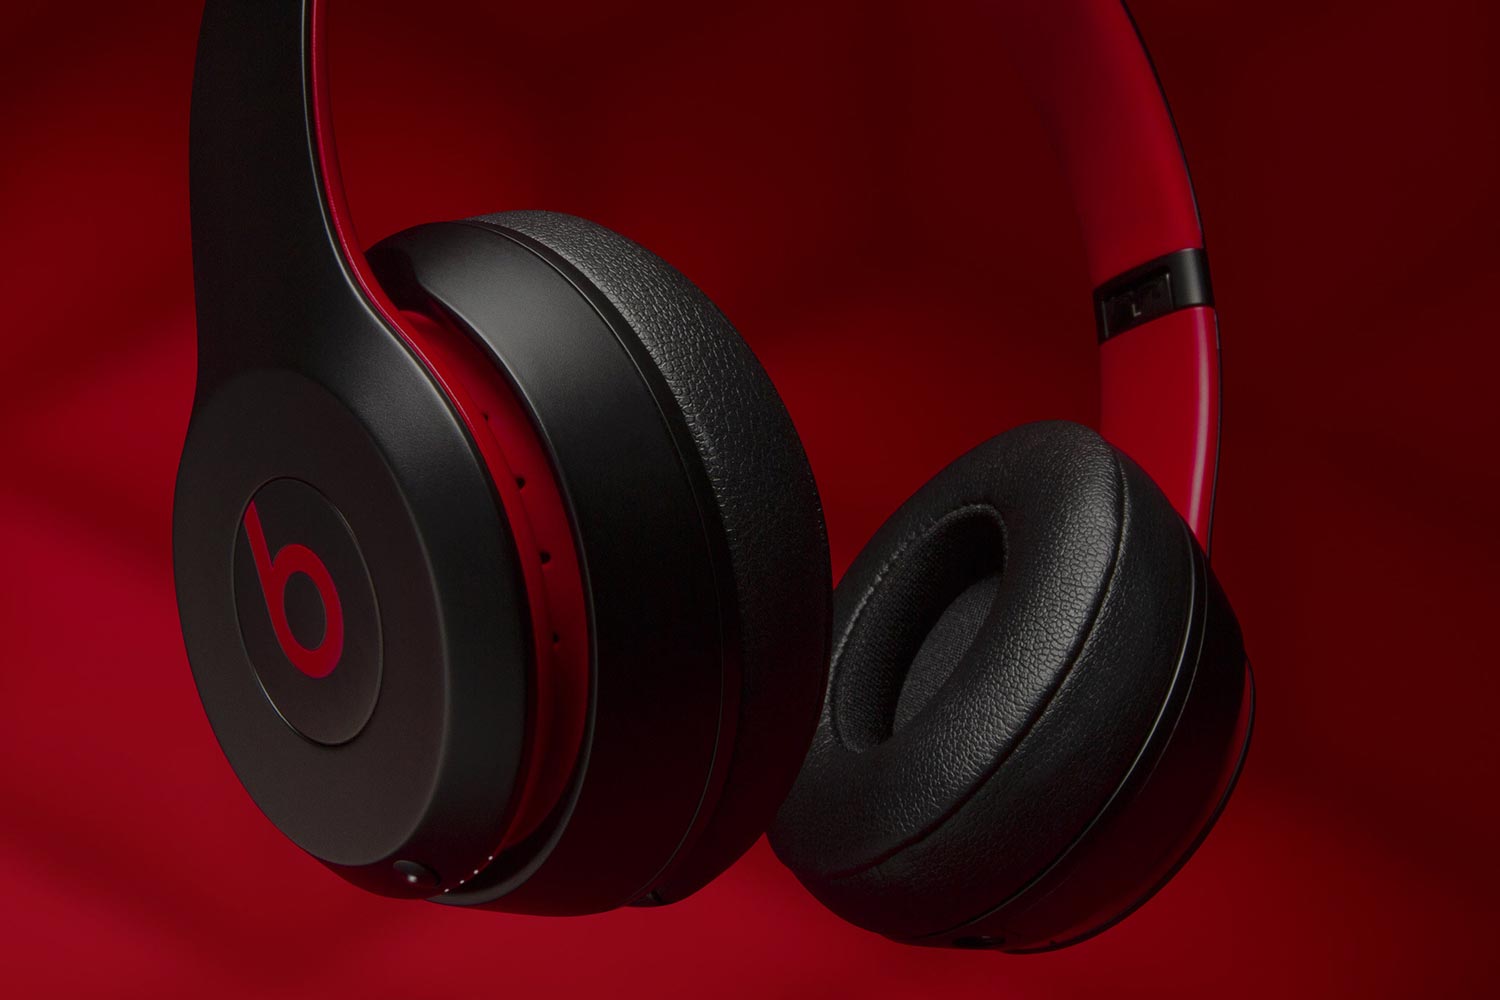 Dre – The Beats Decade Collection 